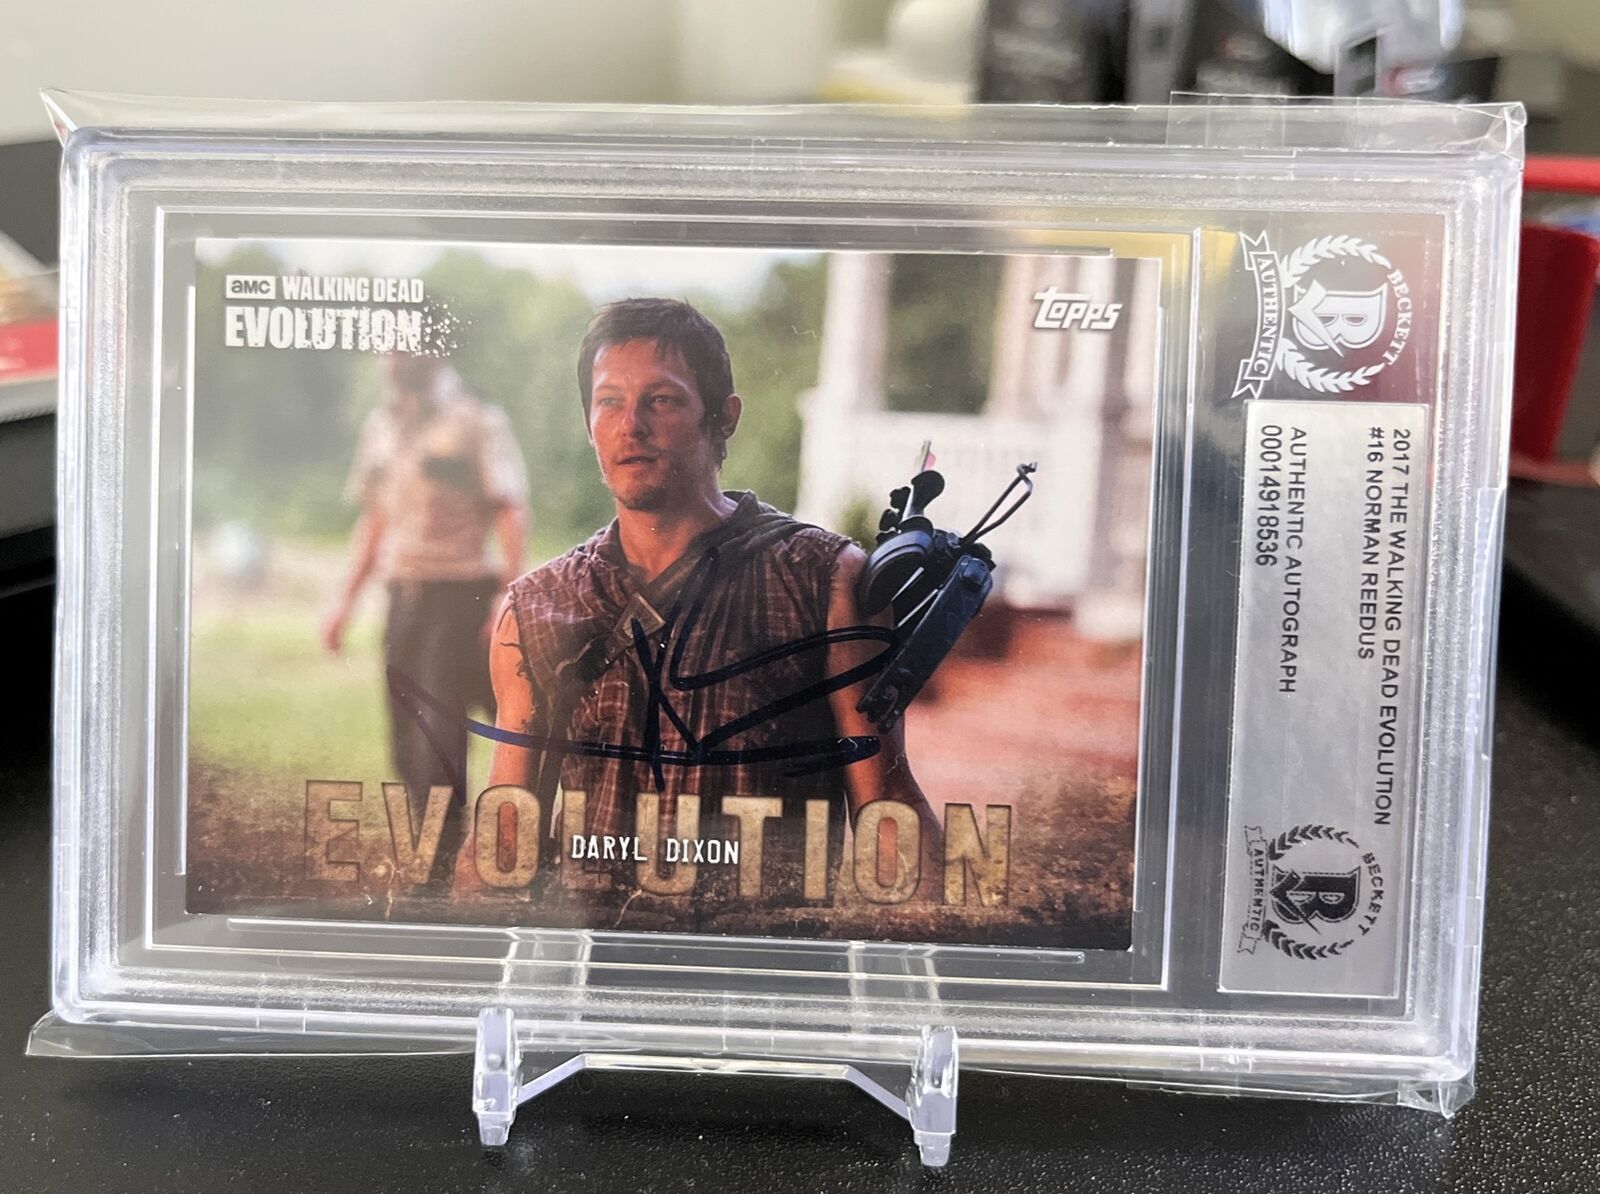 Norman Reedus Authentic Auto “Daryl Dixon”  (The Walking Dead) BGS CERTIFIED